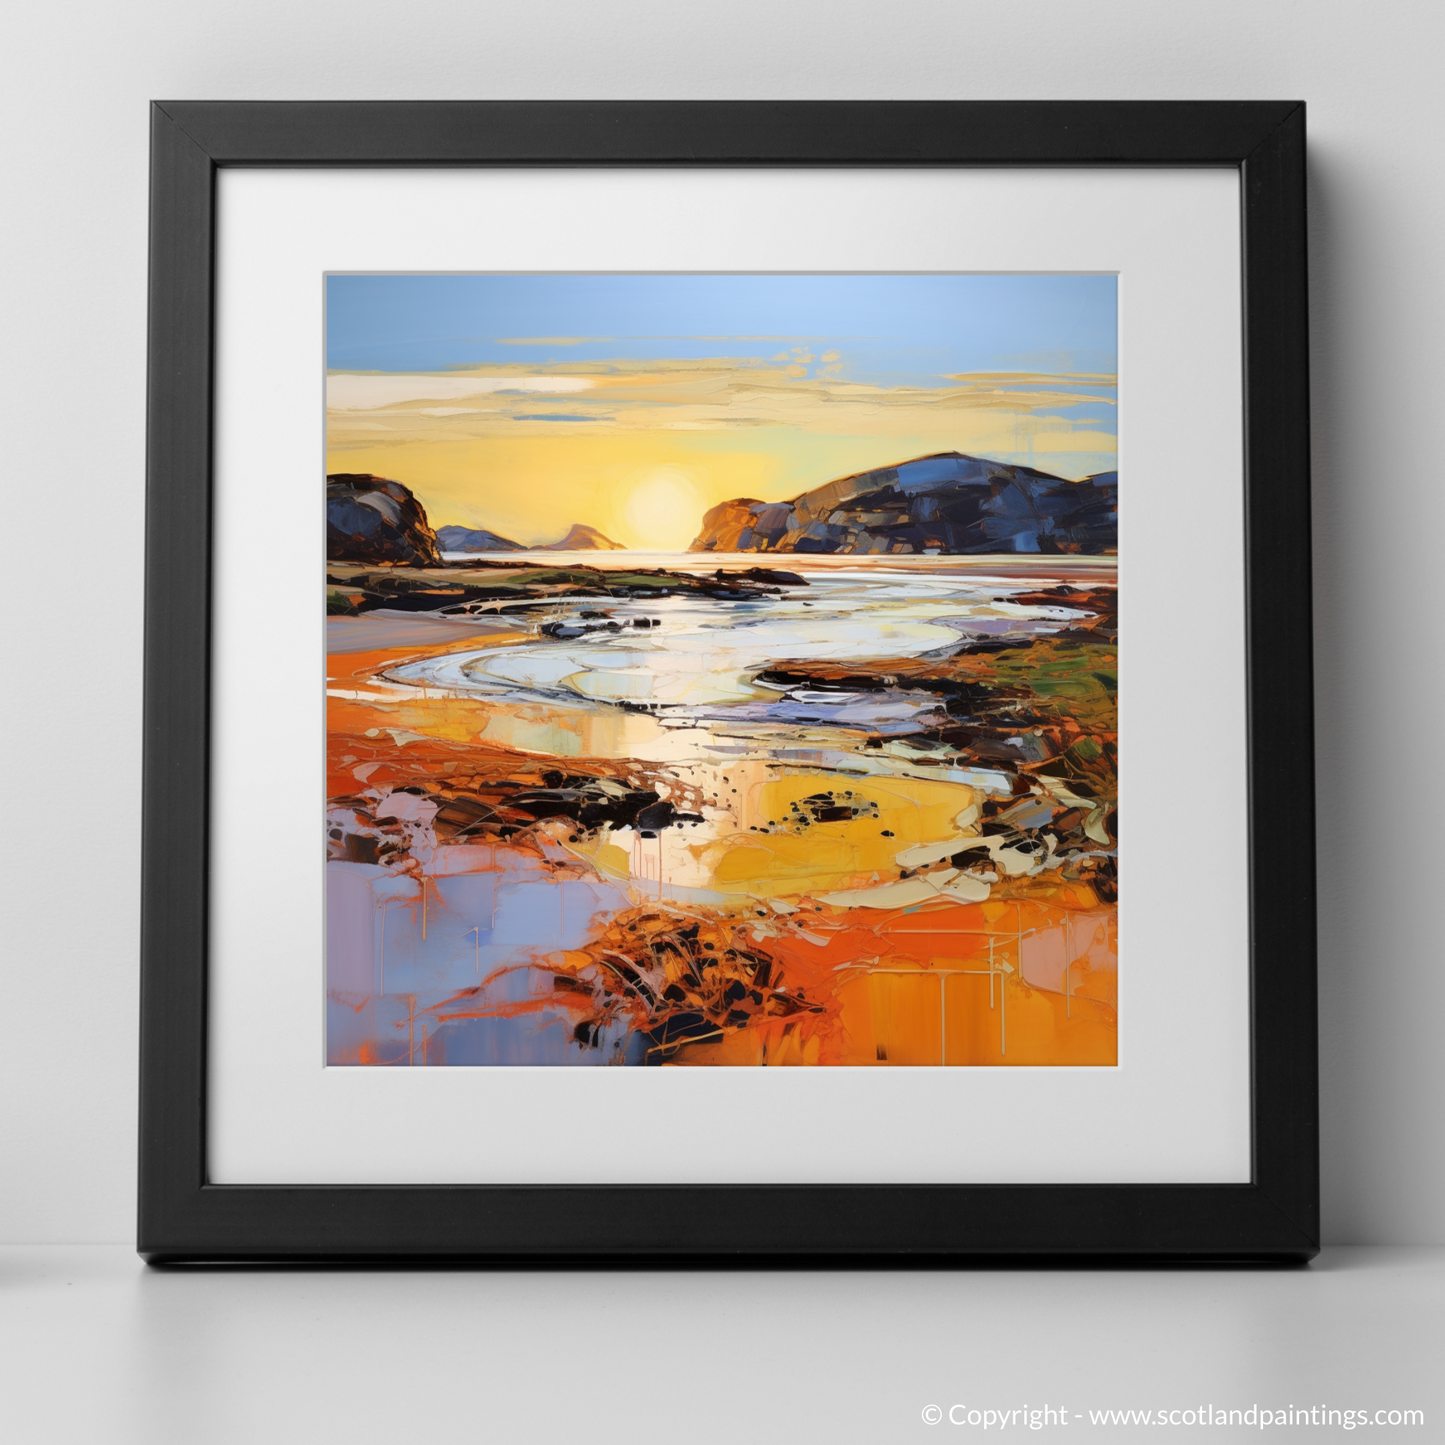 Art Print of Kiloran Bay at golden hour with a black frame